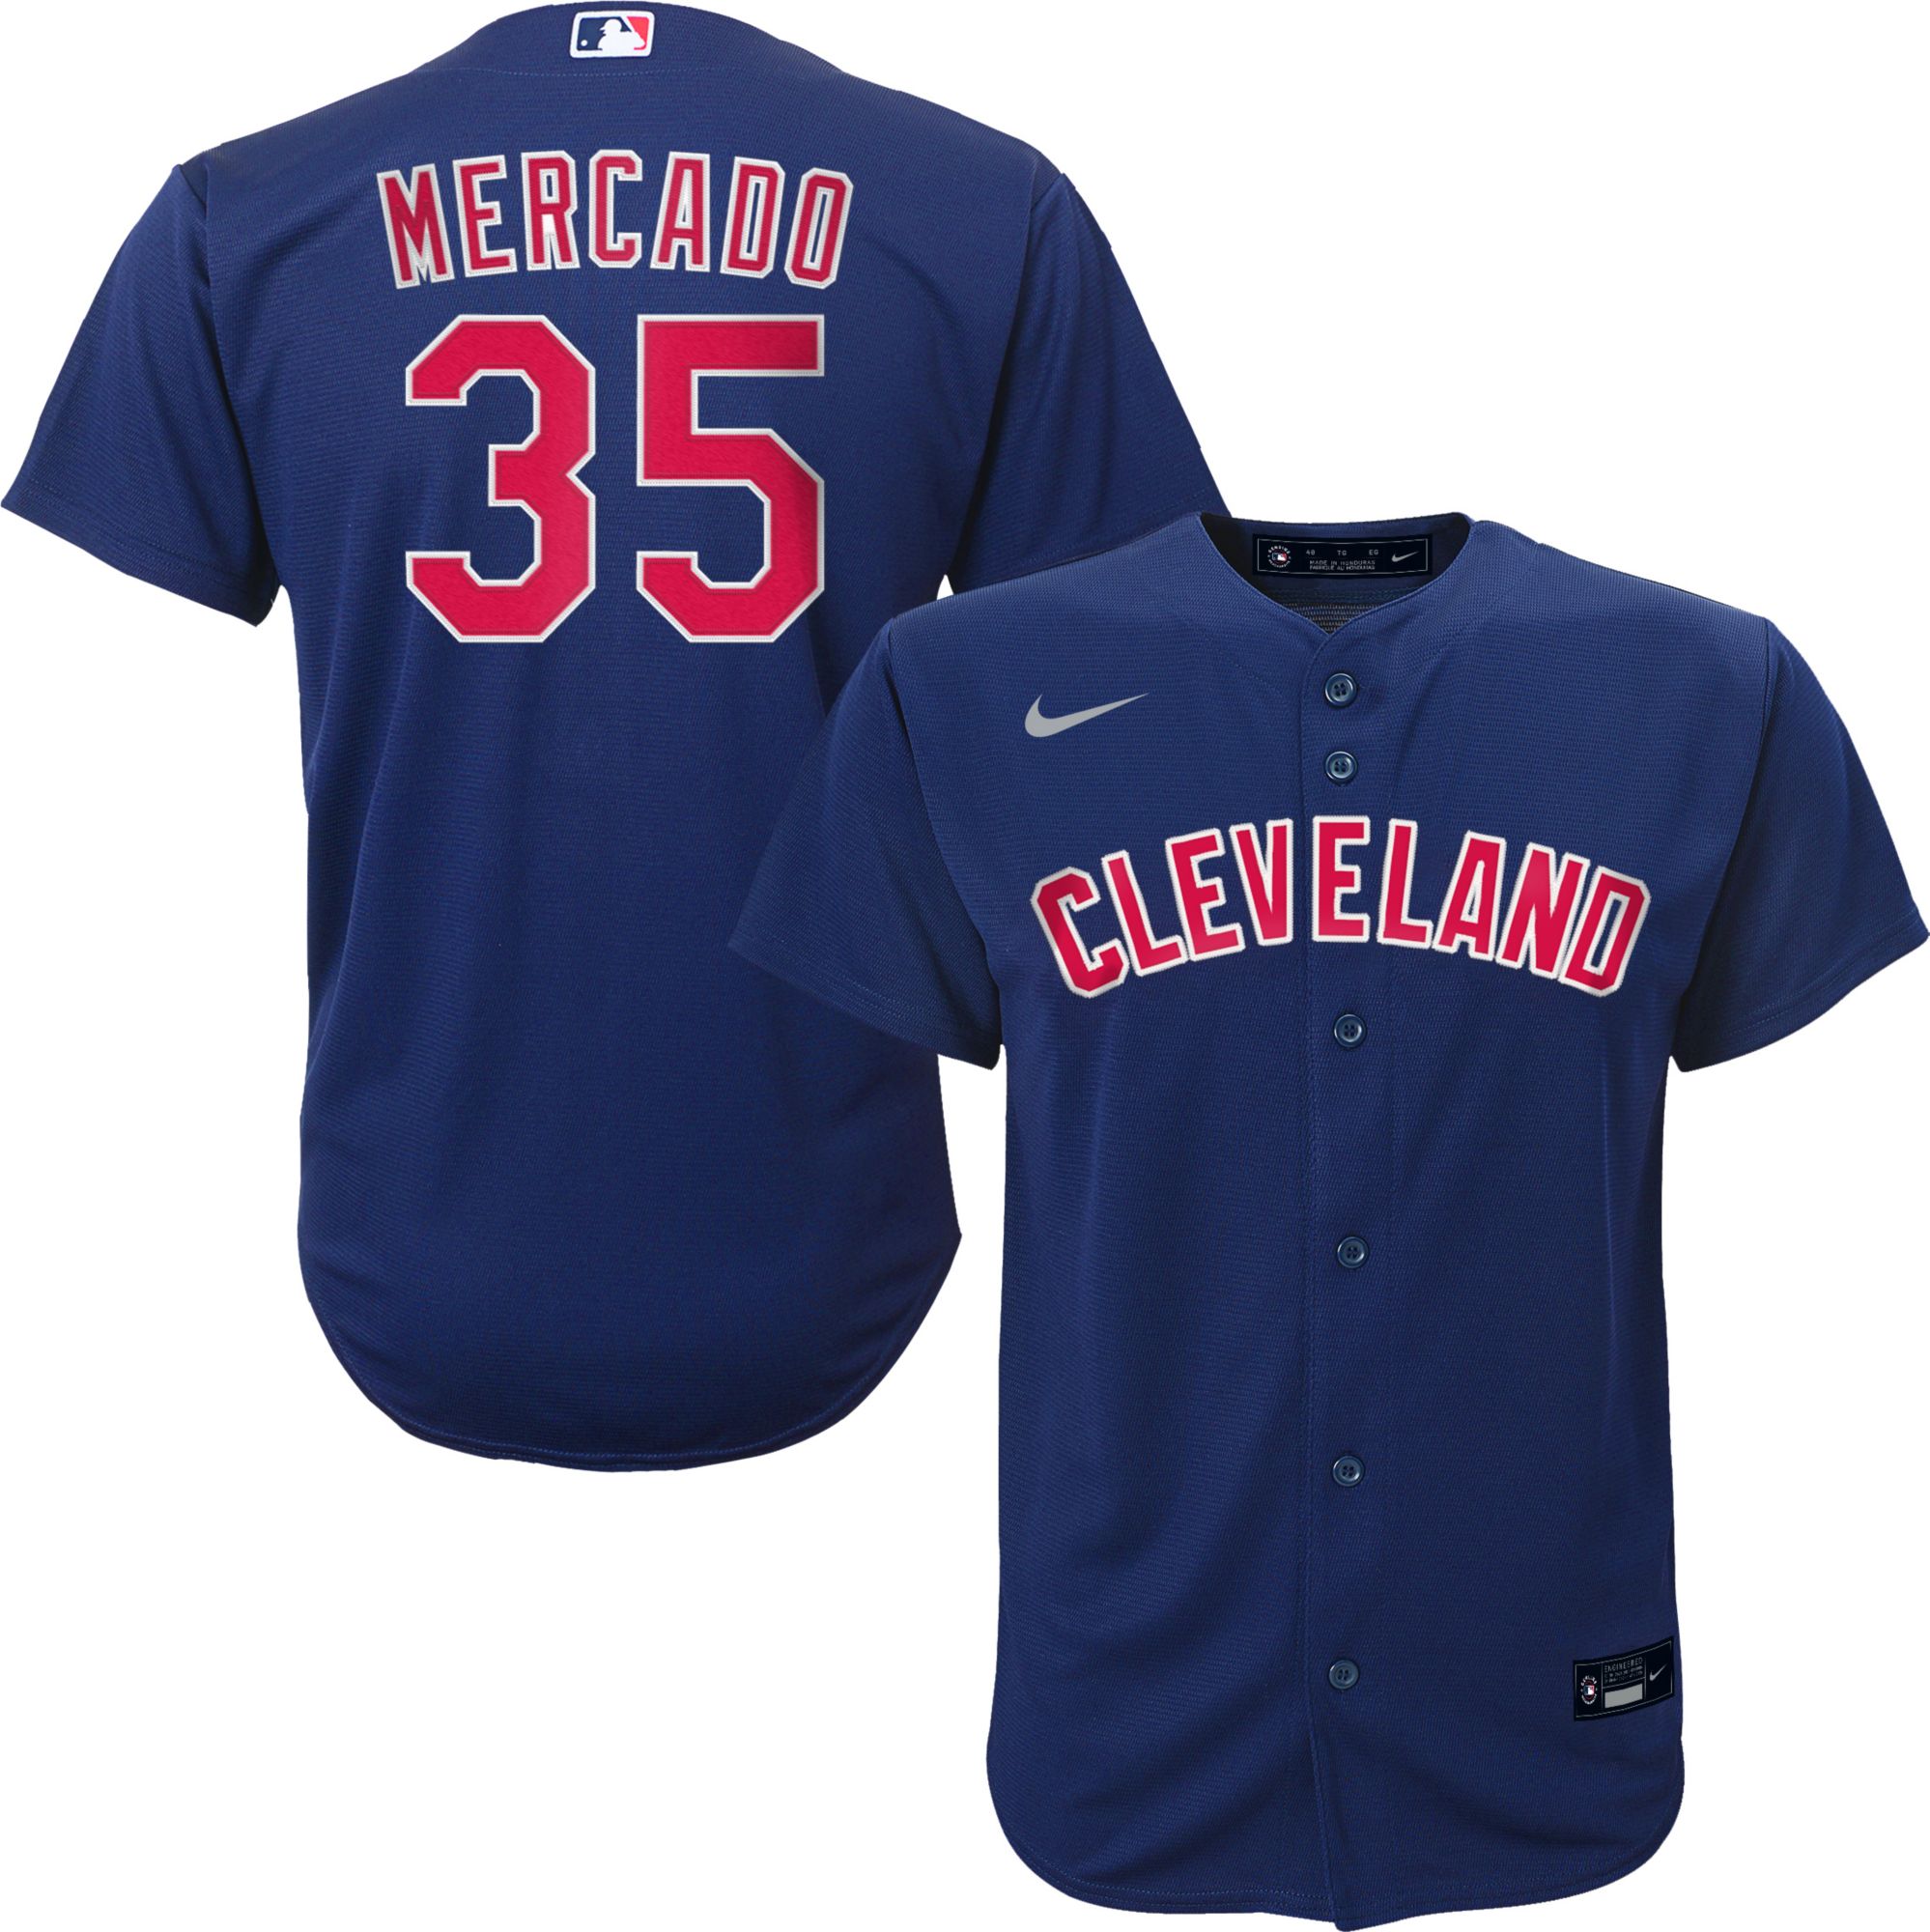 indians navy jersey